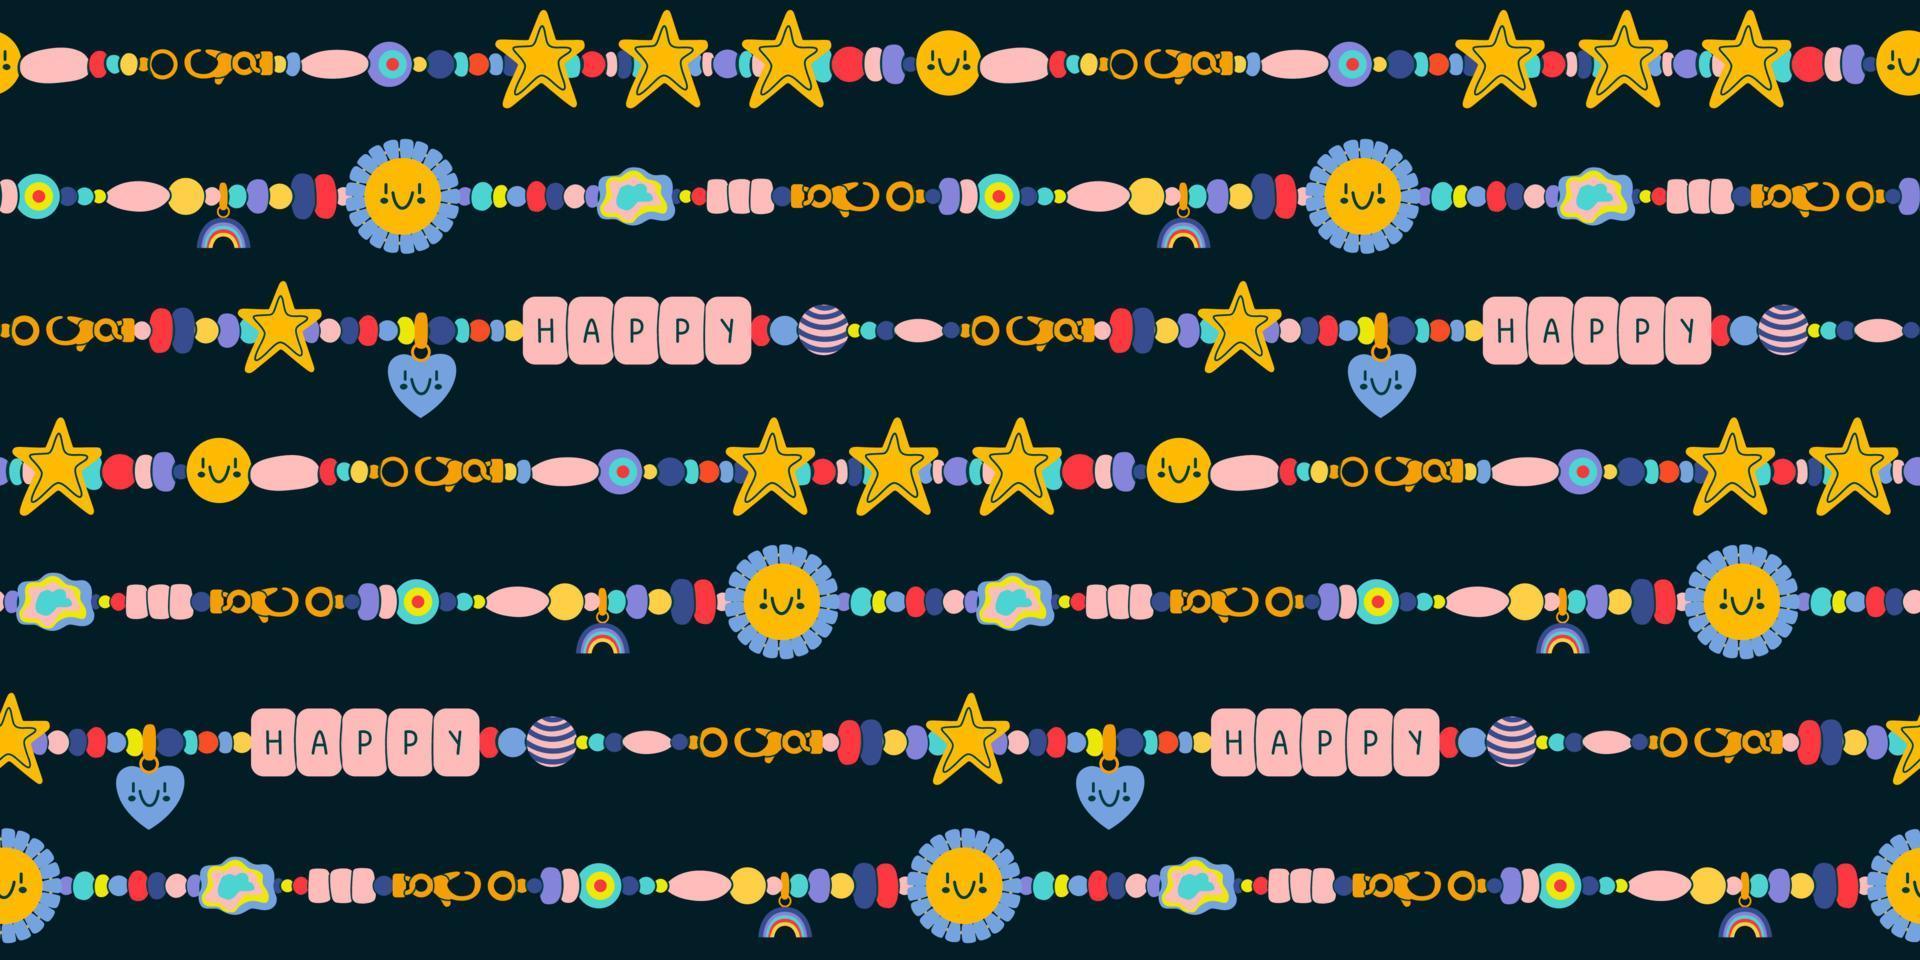 Cute beads bracelet seamless pattern. Retro colorful funky bracelet with smiley heart, star and happy text. Cartoon 00s style. Hand made, diy concept. Hand drawn Vector illustration.